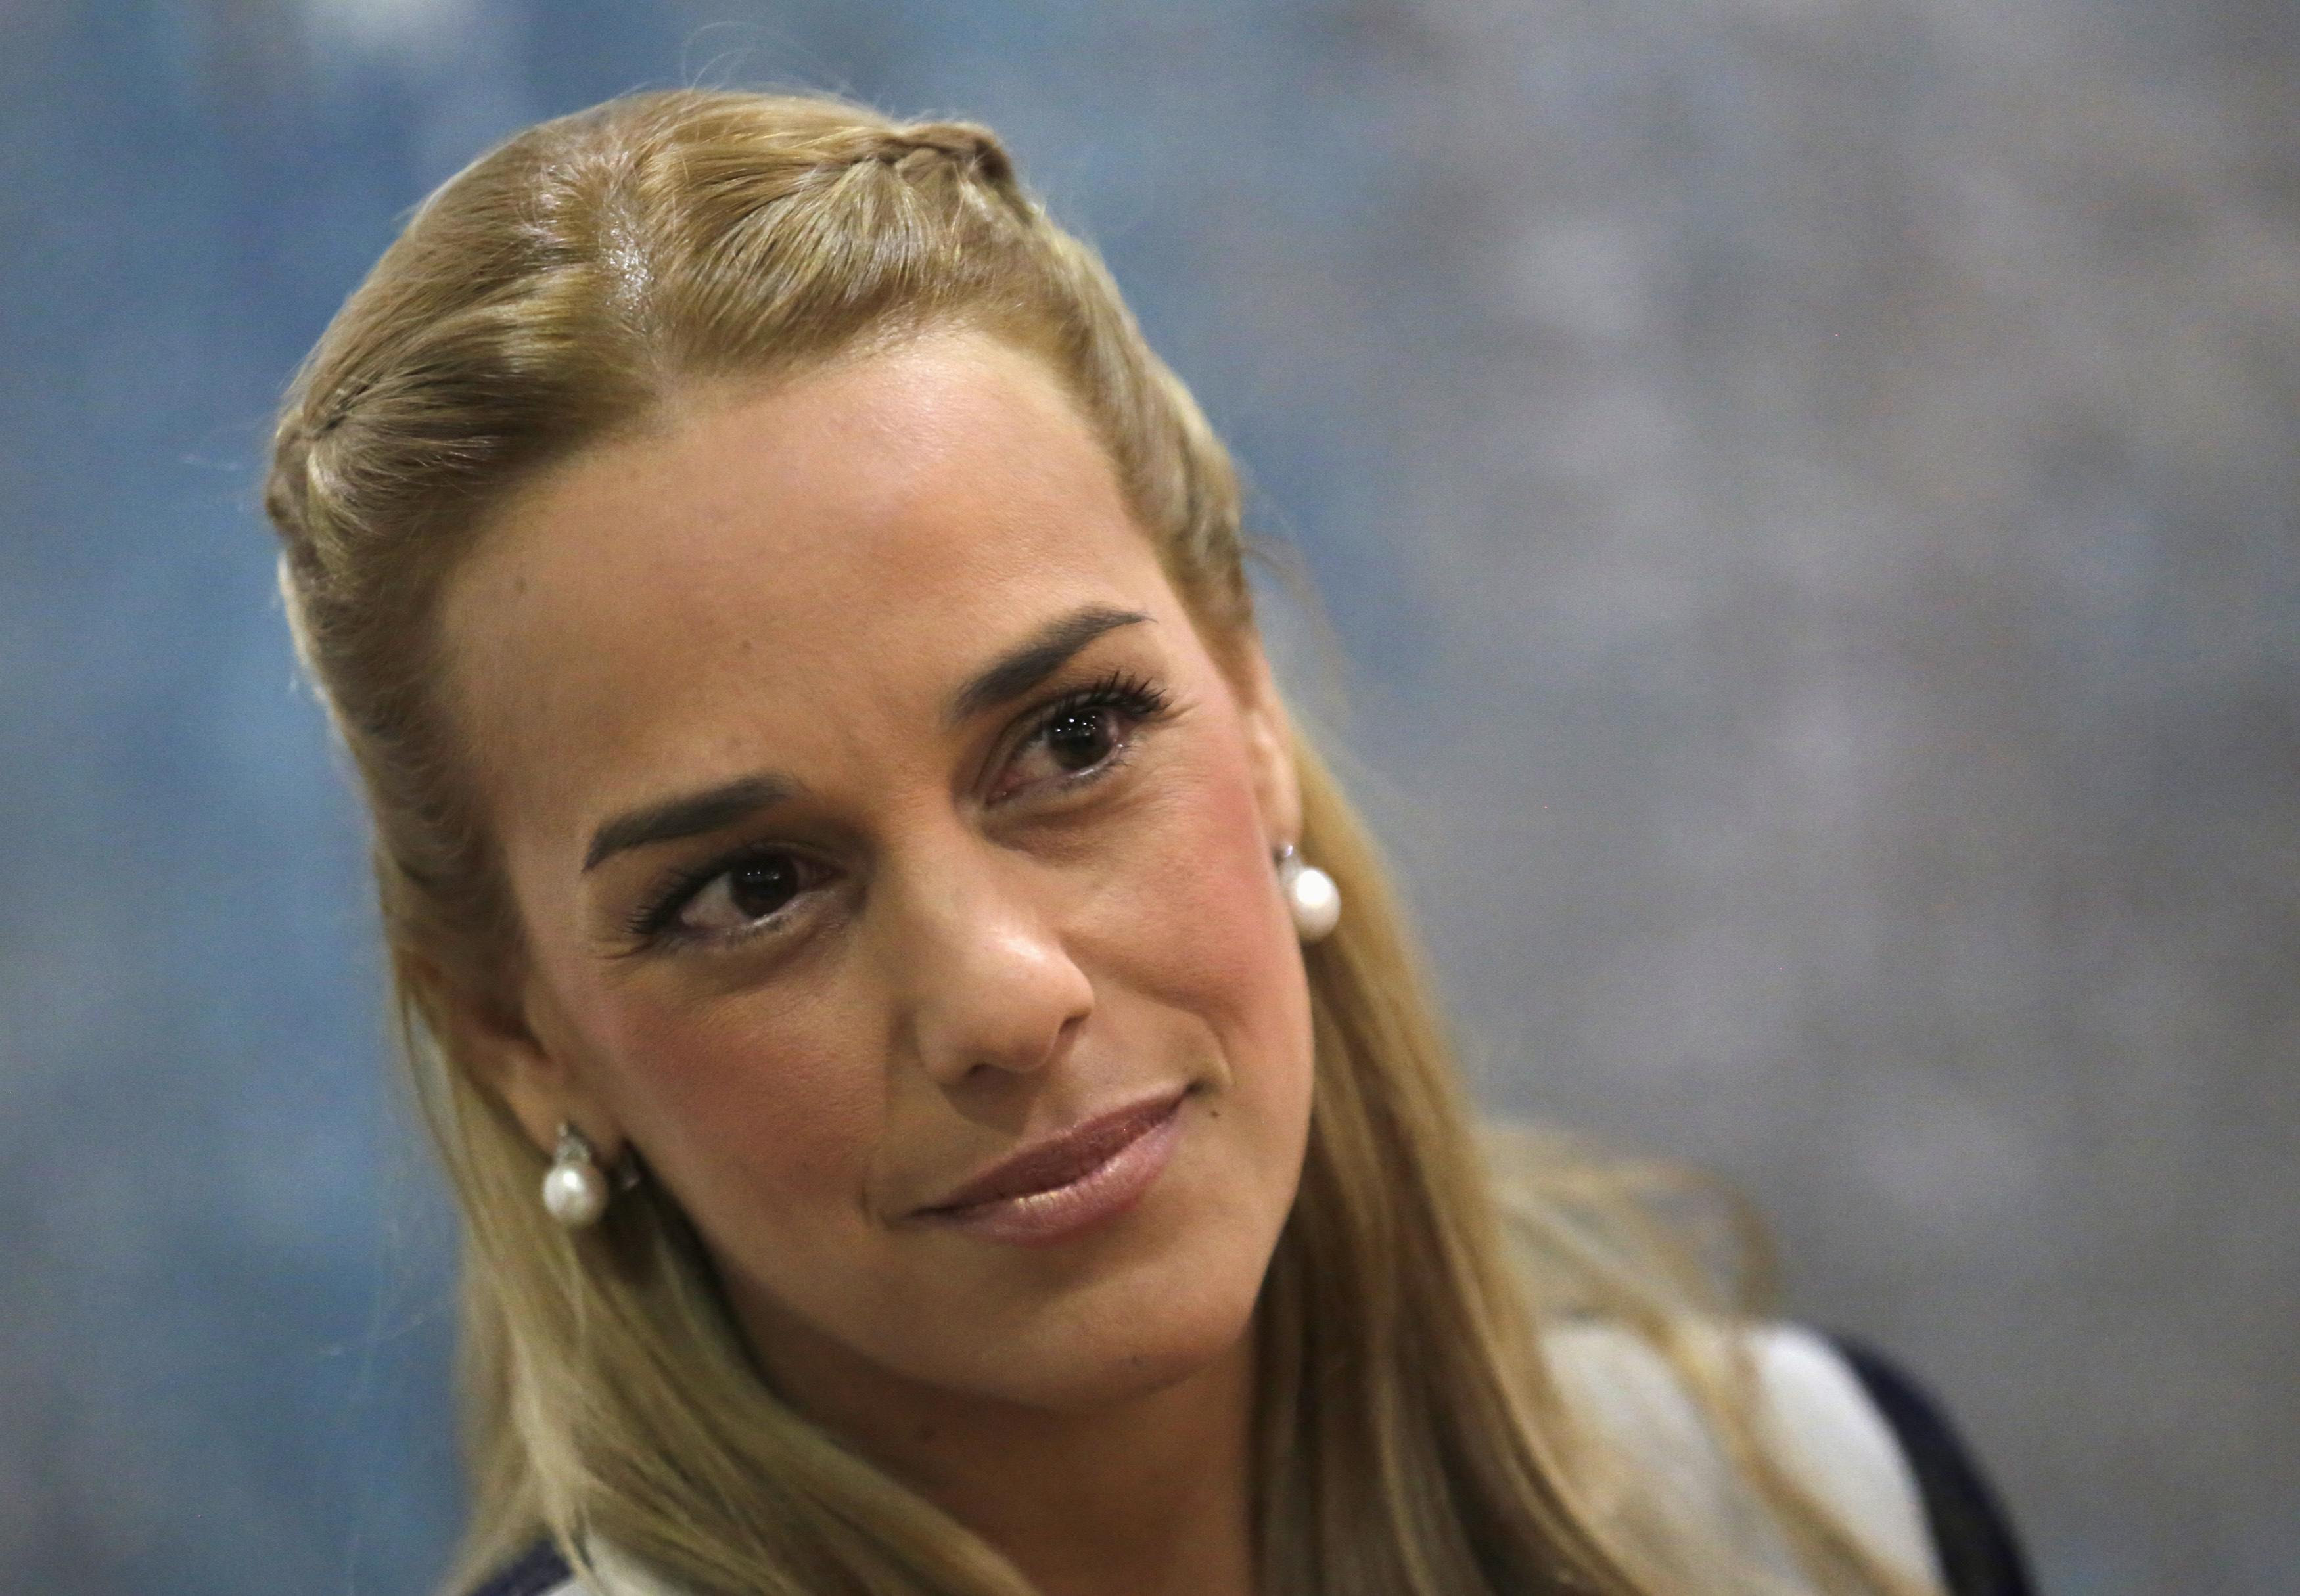 Tintori attends a news conference in Mexico City